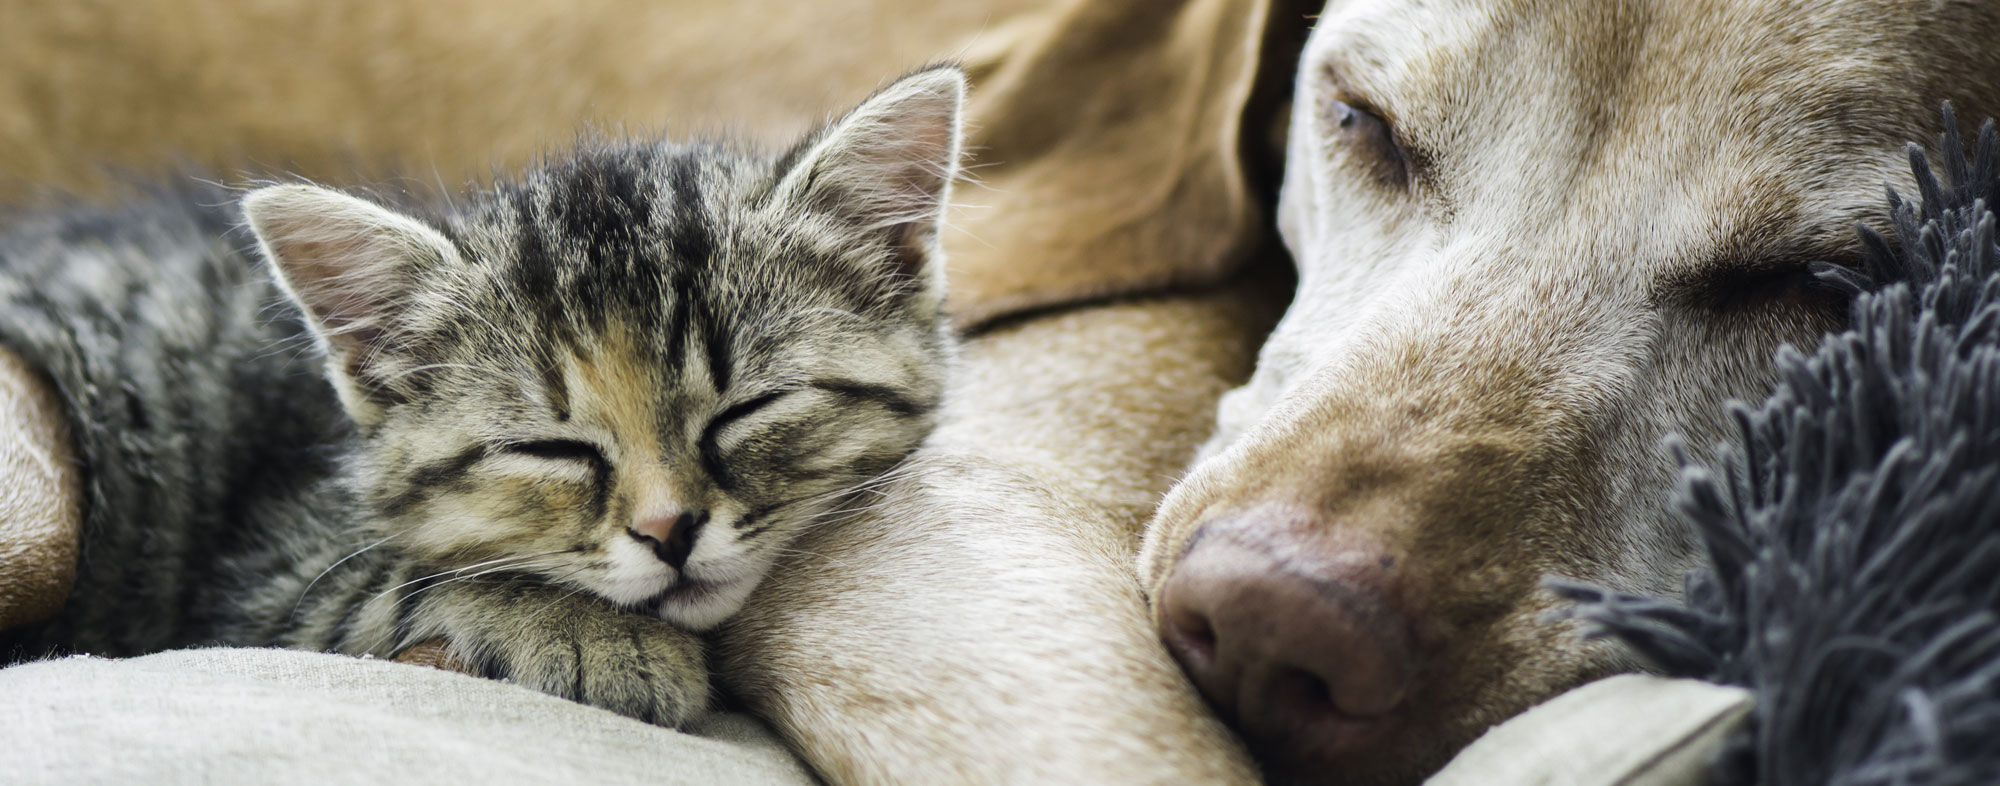 Kitten and dog sleeping next to each other. Learn more about cats and dogs living together.